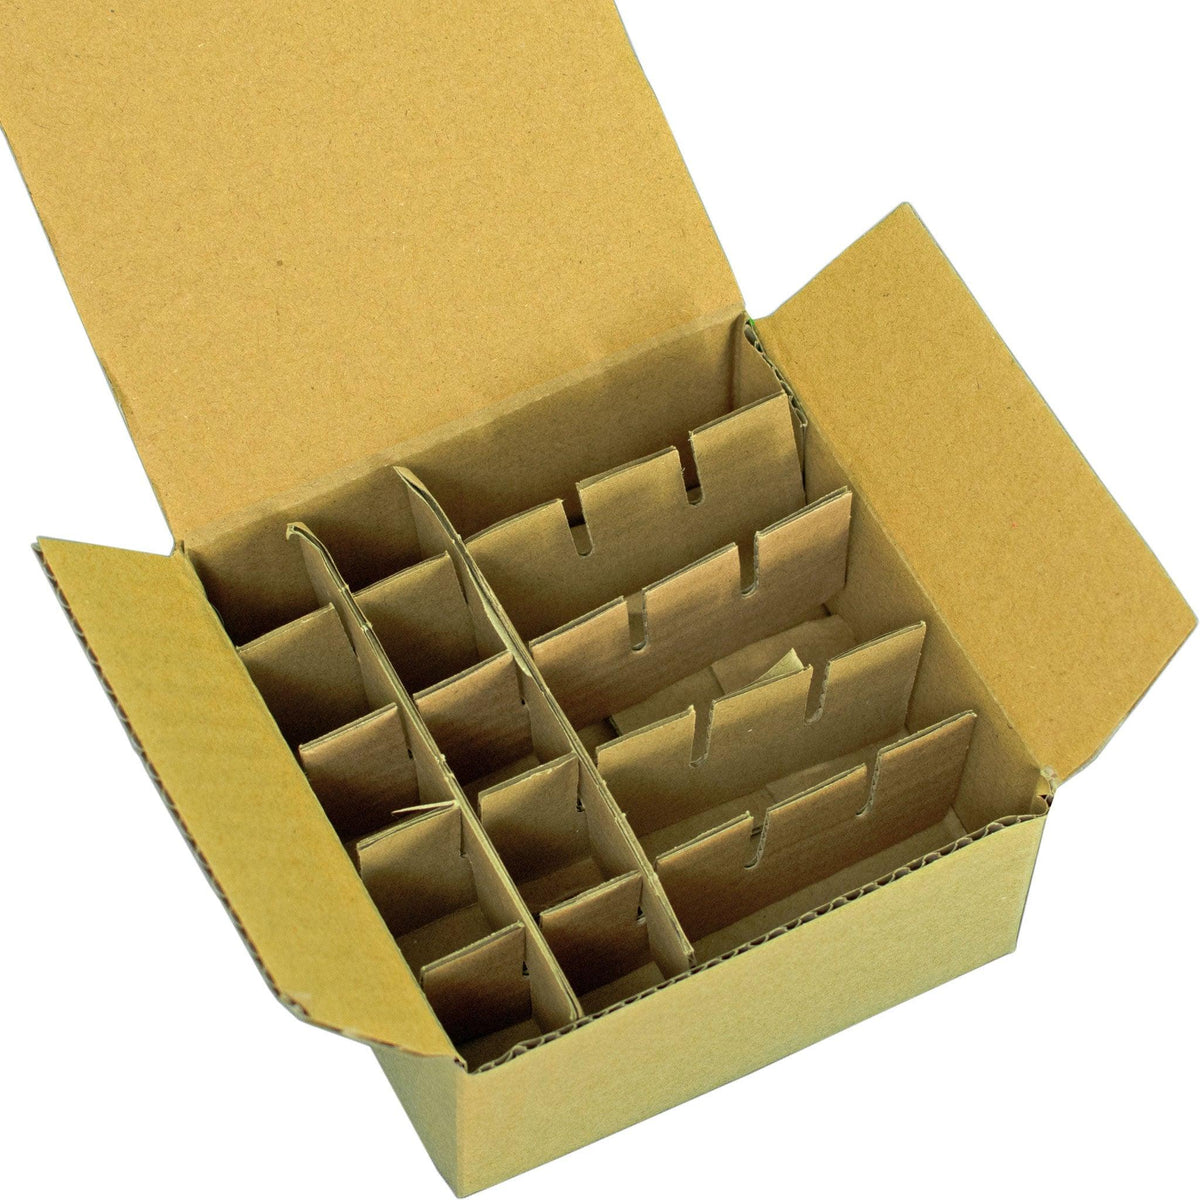 Purchase brand new empty Cardboard Boxes for your C-7 Light Bulbs from Lee Display. Organize your holiday lights, store your bulbs safely, and keep them safe from water damage. On sale now at leedisplay.com